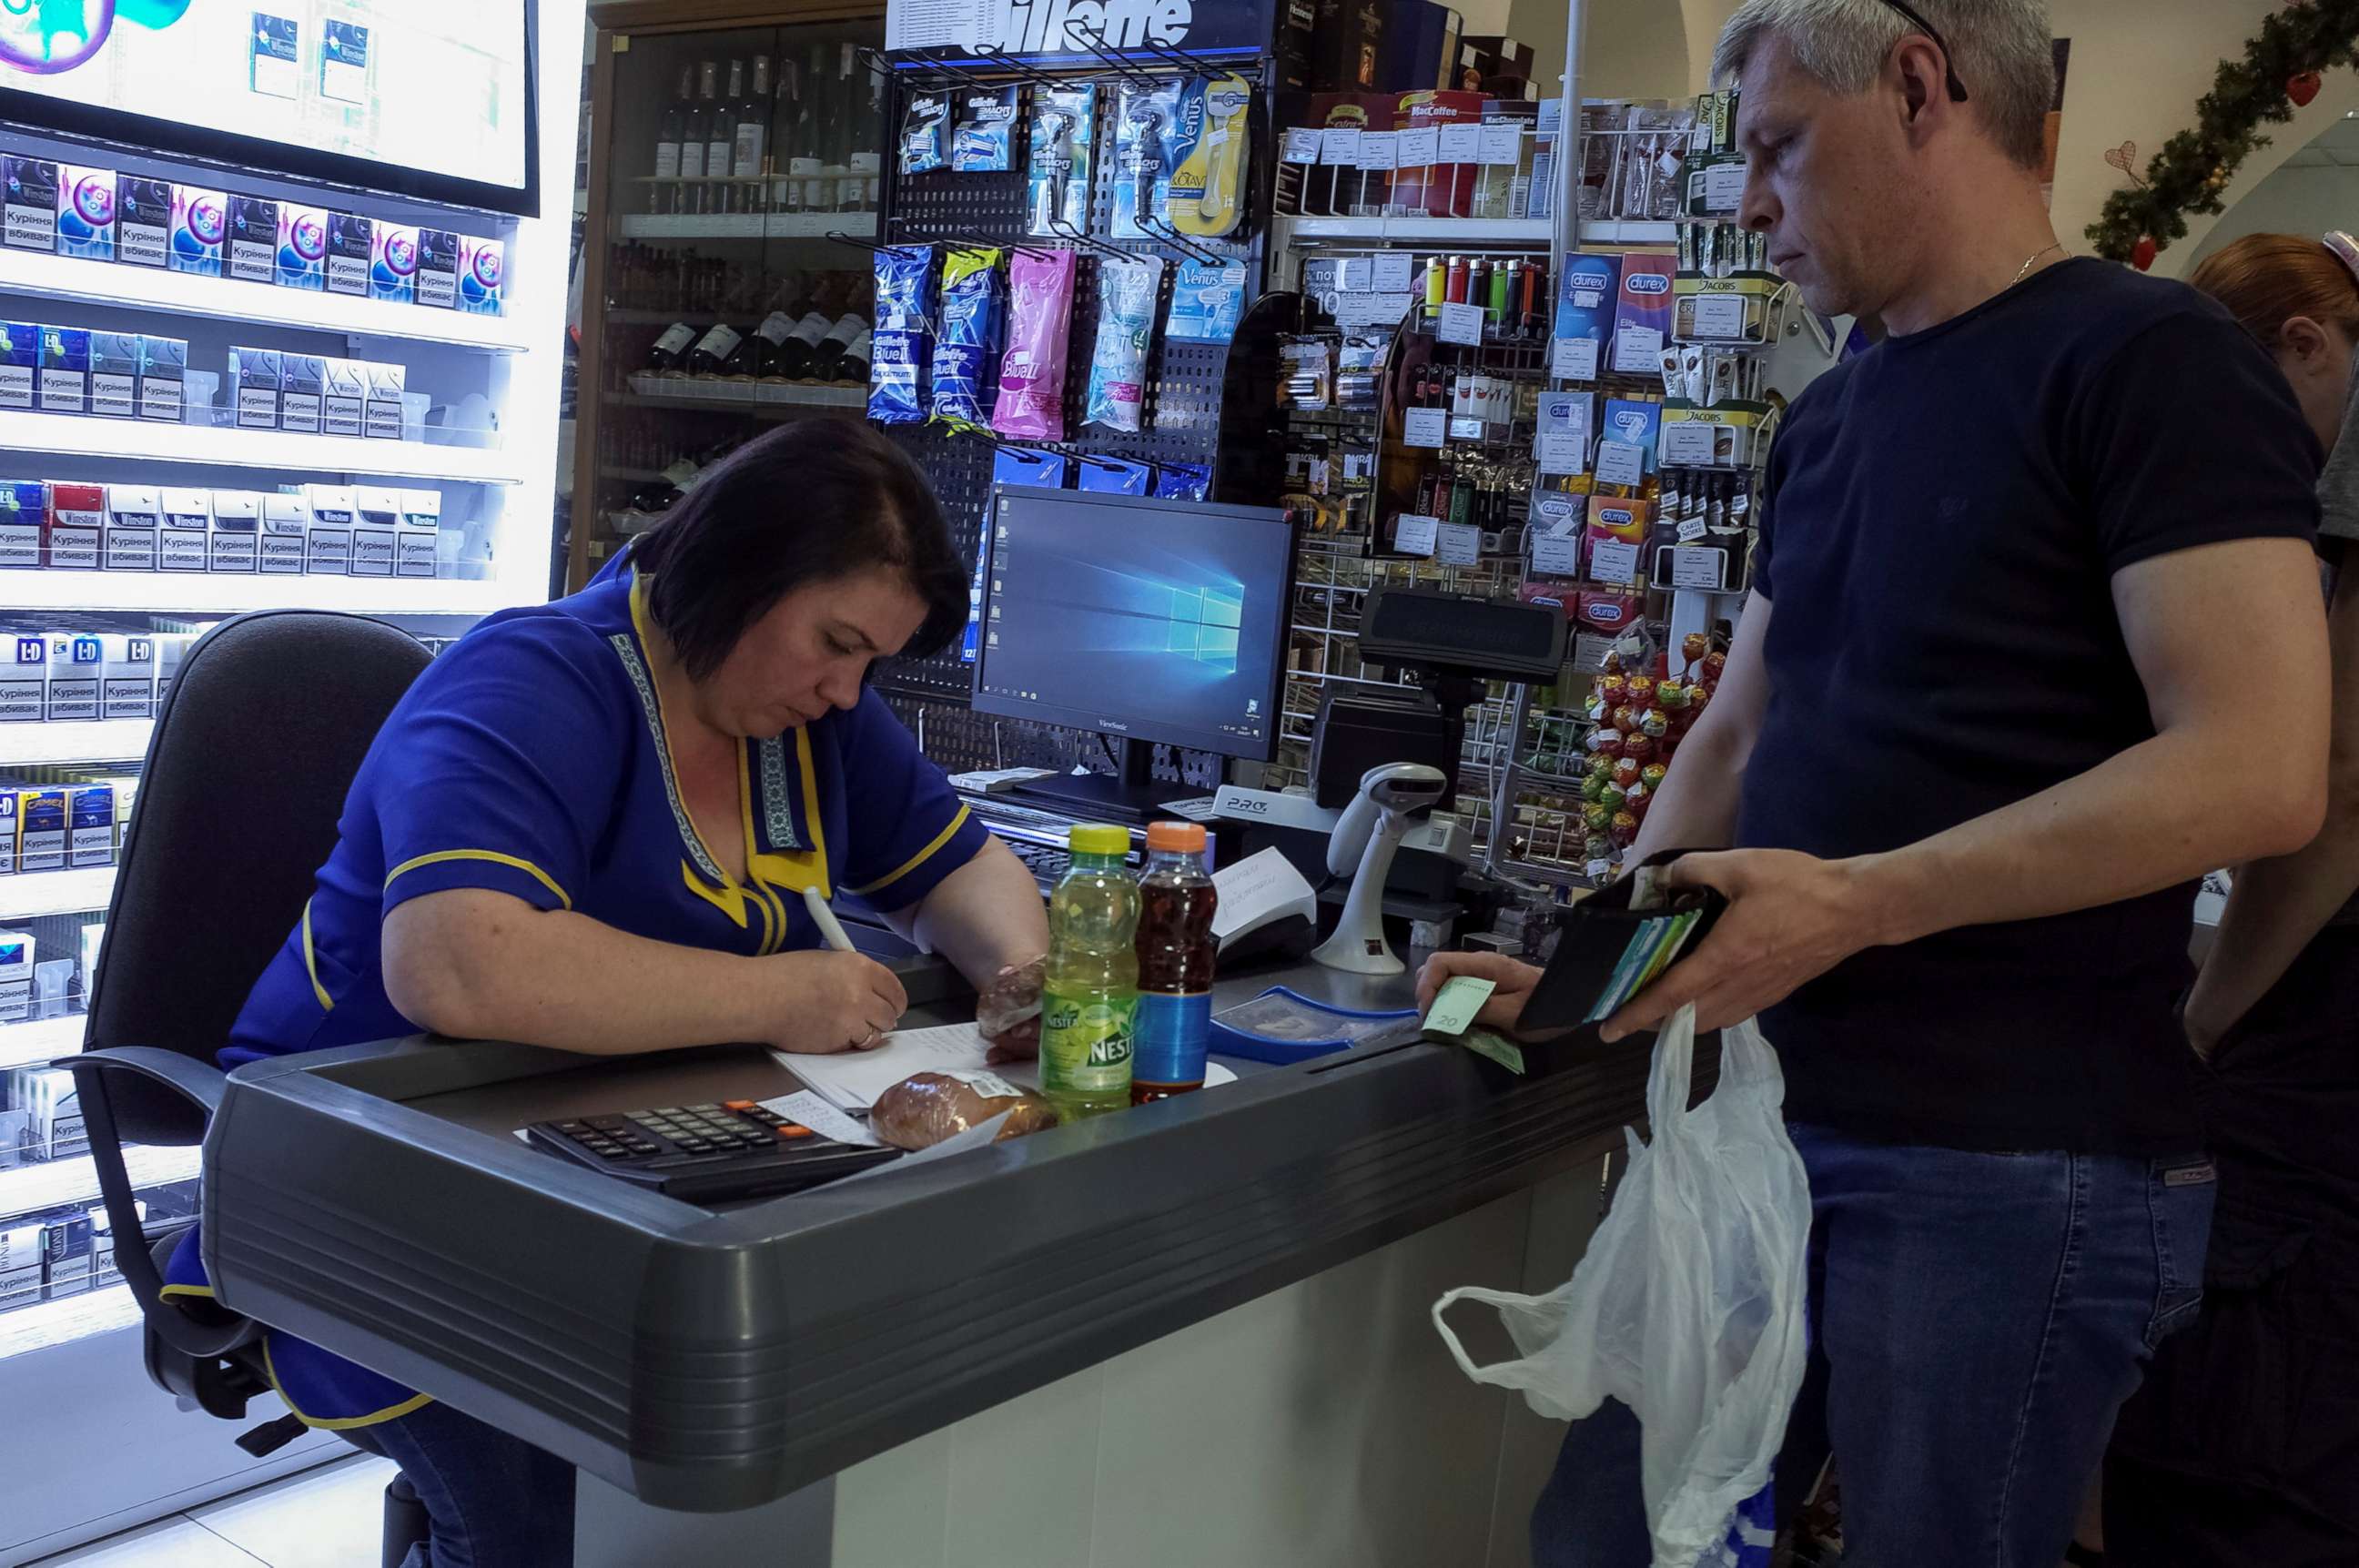 PHOTO: A customer at a store in Kiev, Ukraine, waits while a cashier writes out a purchase receipt for store records, as many business have turned off their digital cash registers after cases of cyber attacks on business, June 28, 2017.